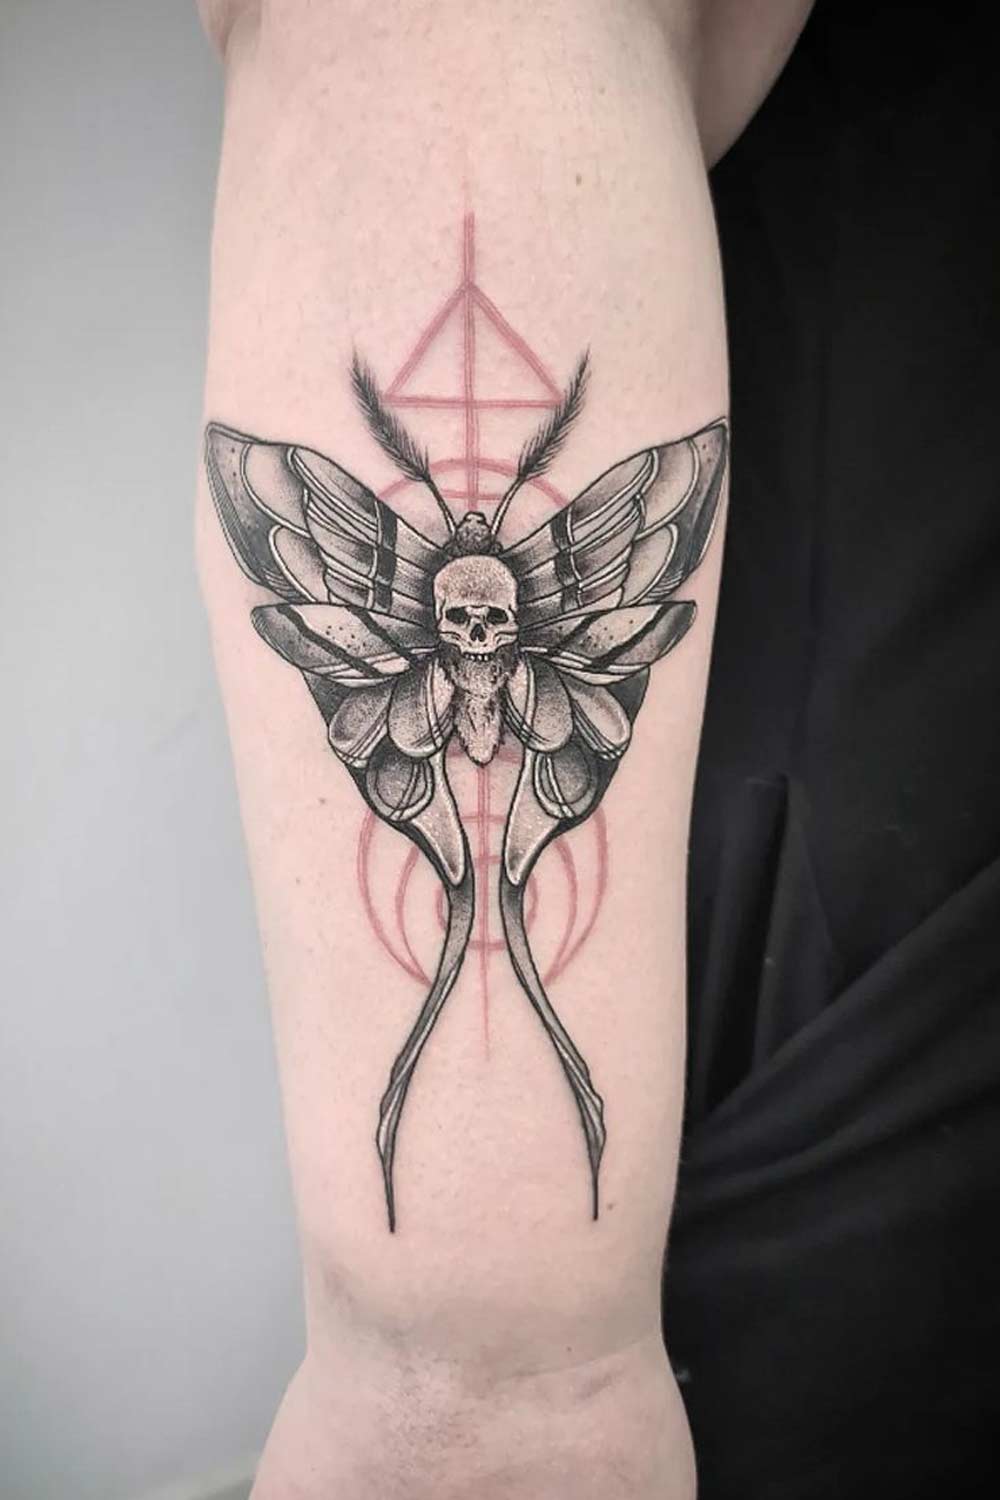 Butterfly Tattoo with Skull Design